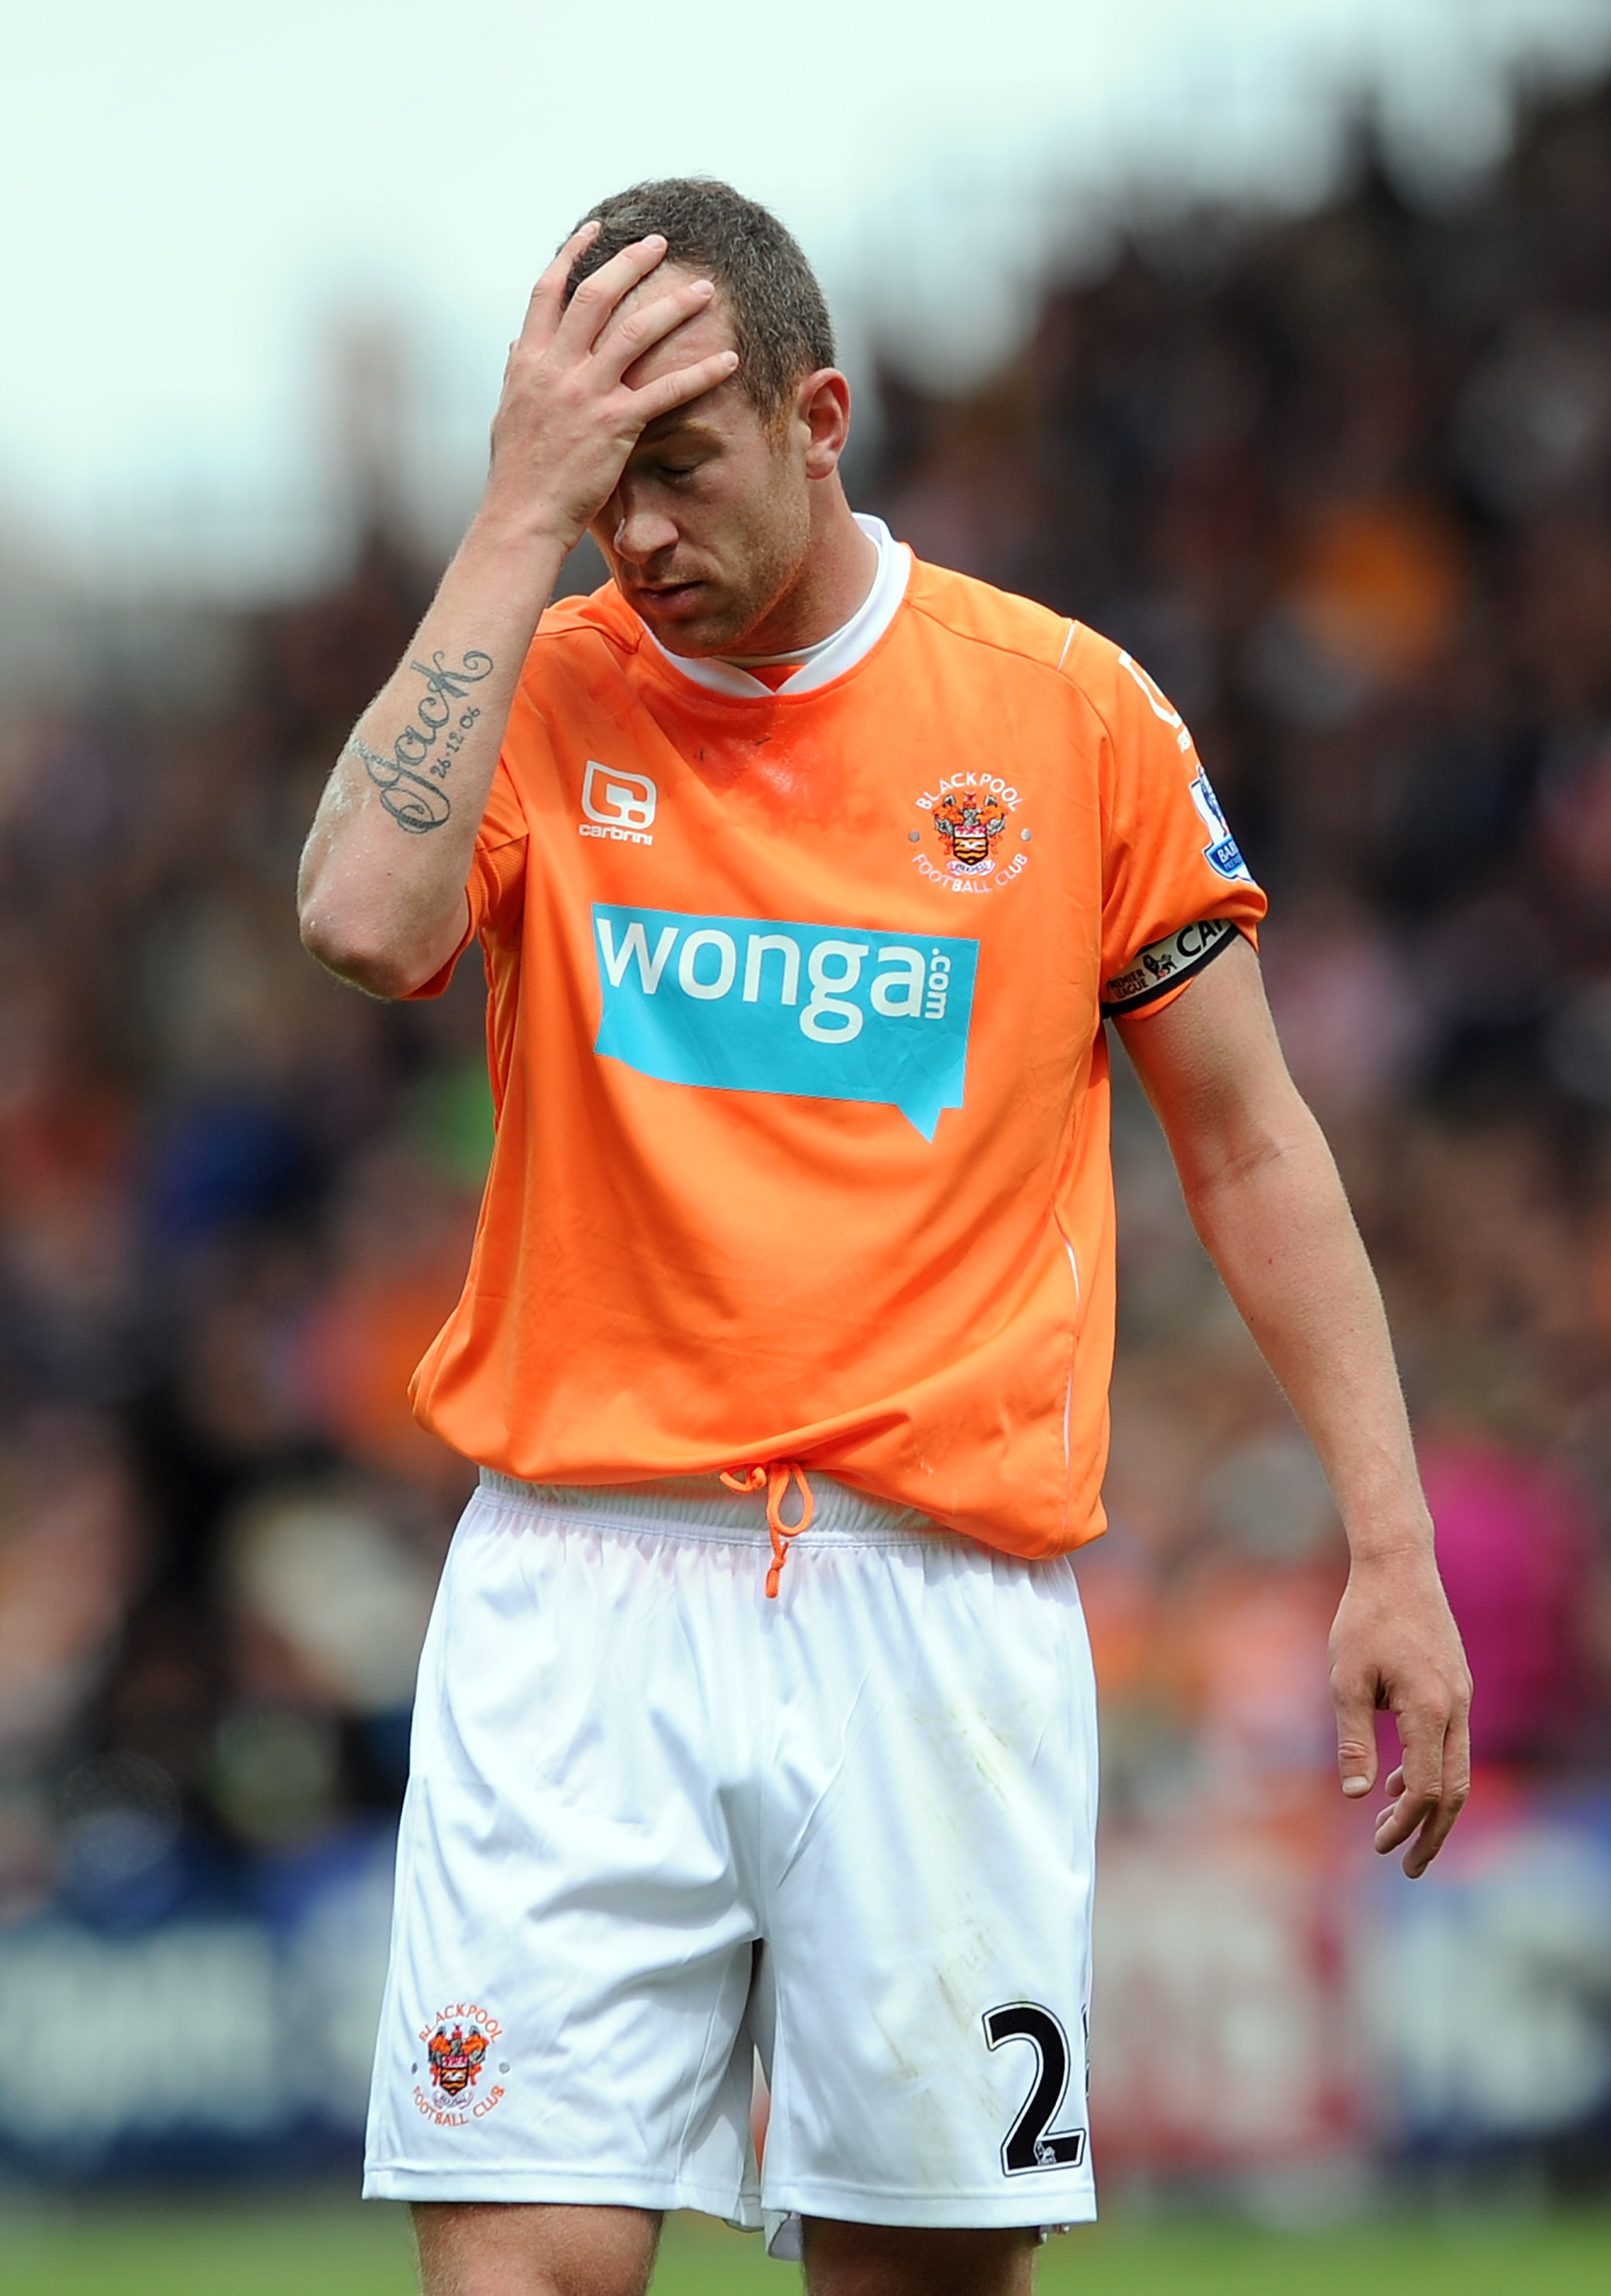 BLACKPOOL, ENGLAND - MAY 14:  Charlie Adam of Blackpool reacts during the Barclays Premier League match between Blackpool and Bolton Wanderers at Bloomfield Road on May 14, 2011 in Blackpool, England.  (Photo by Chris Brunskill/Getty Images)